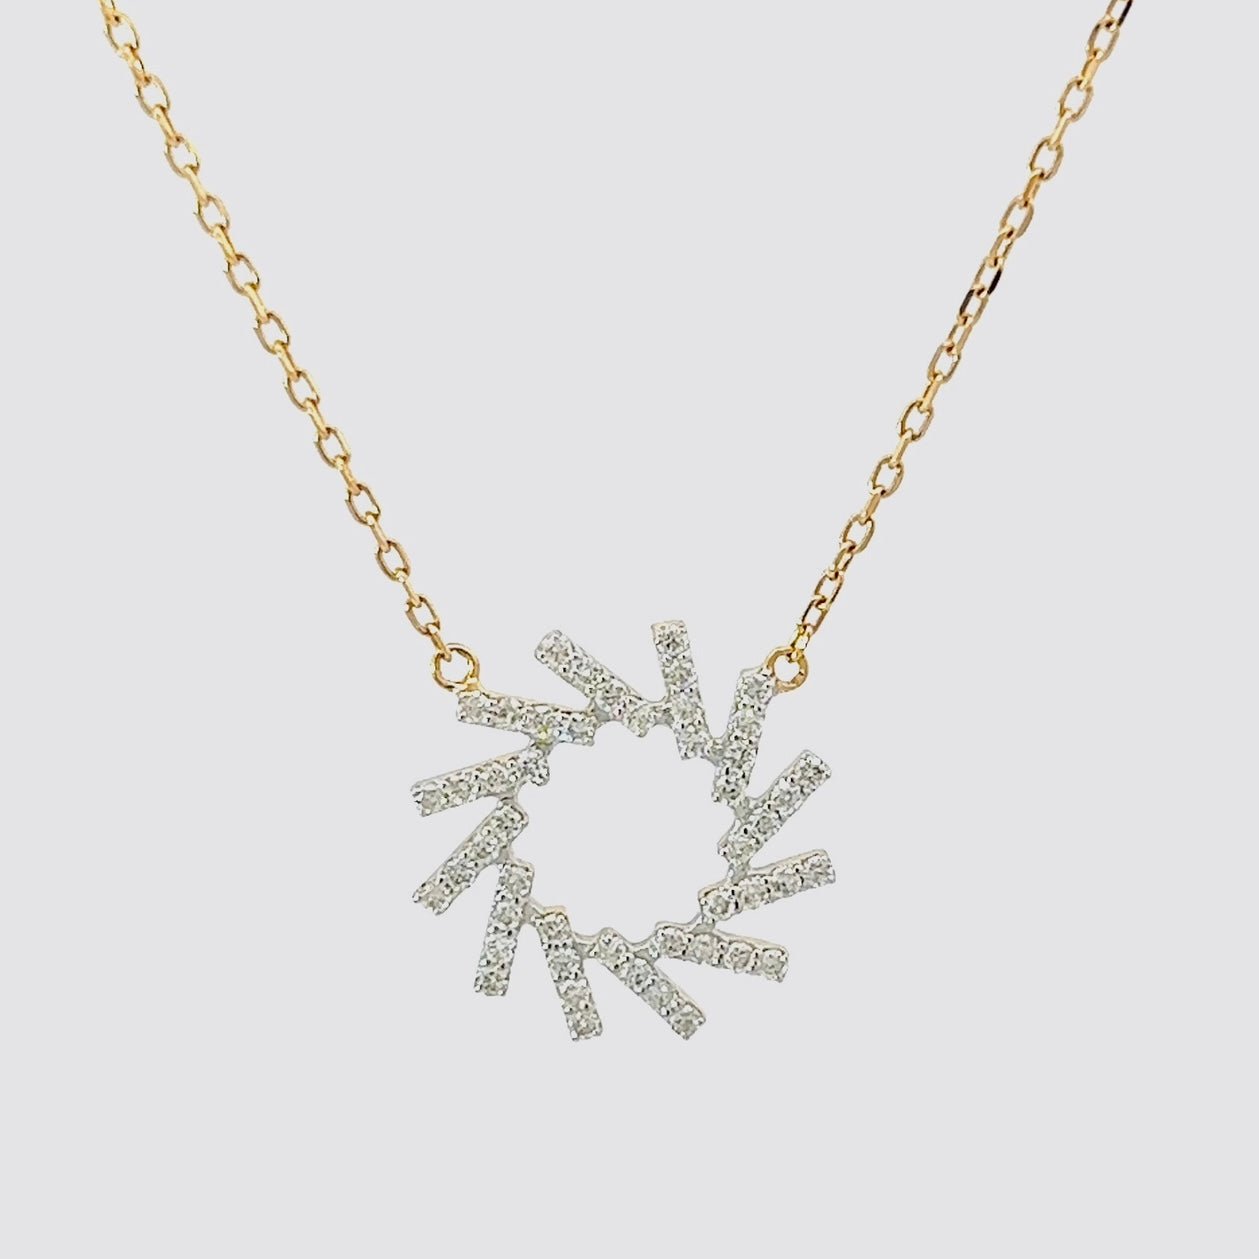 Flavia Necklace in Diamond - 18k Gold - Ly